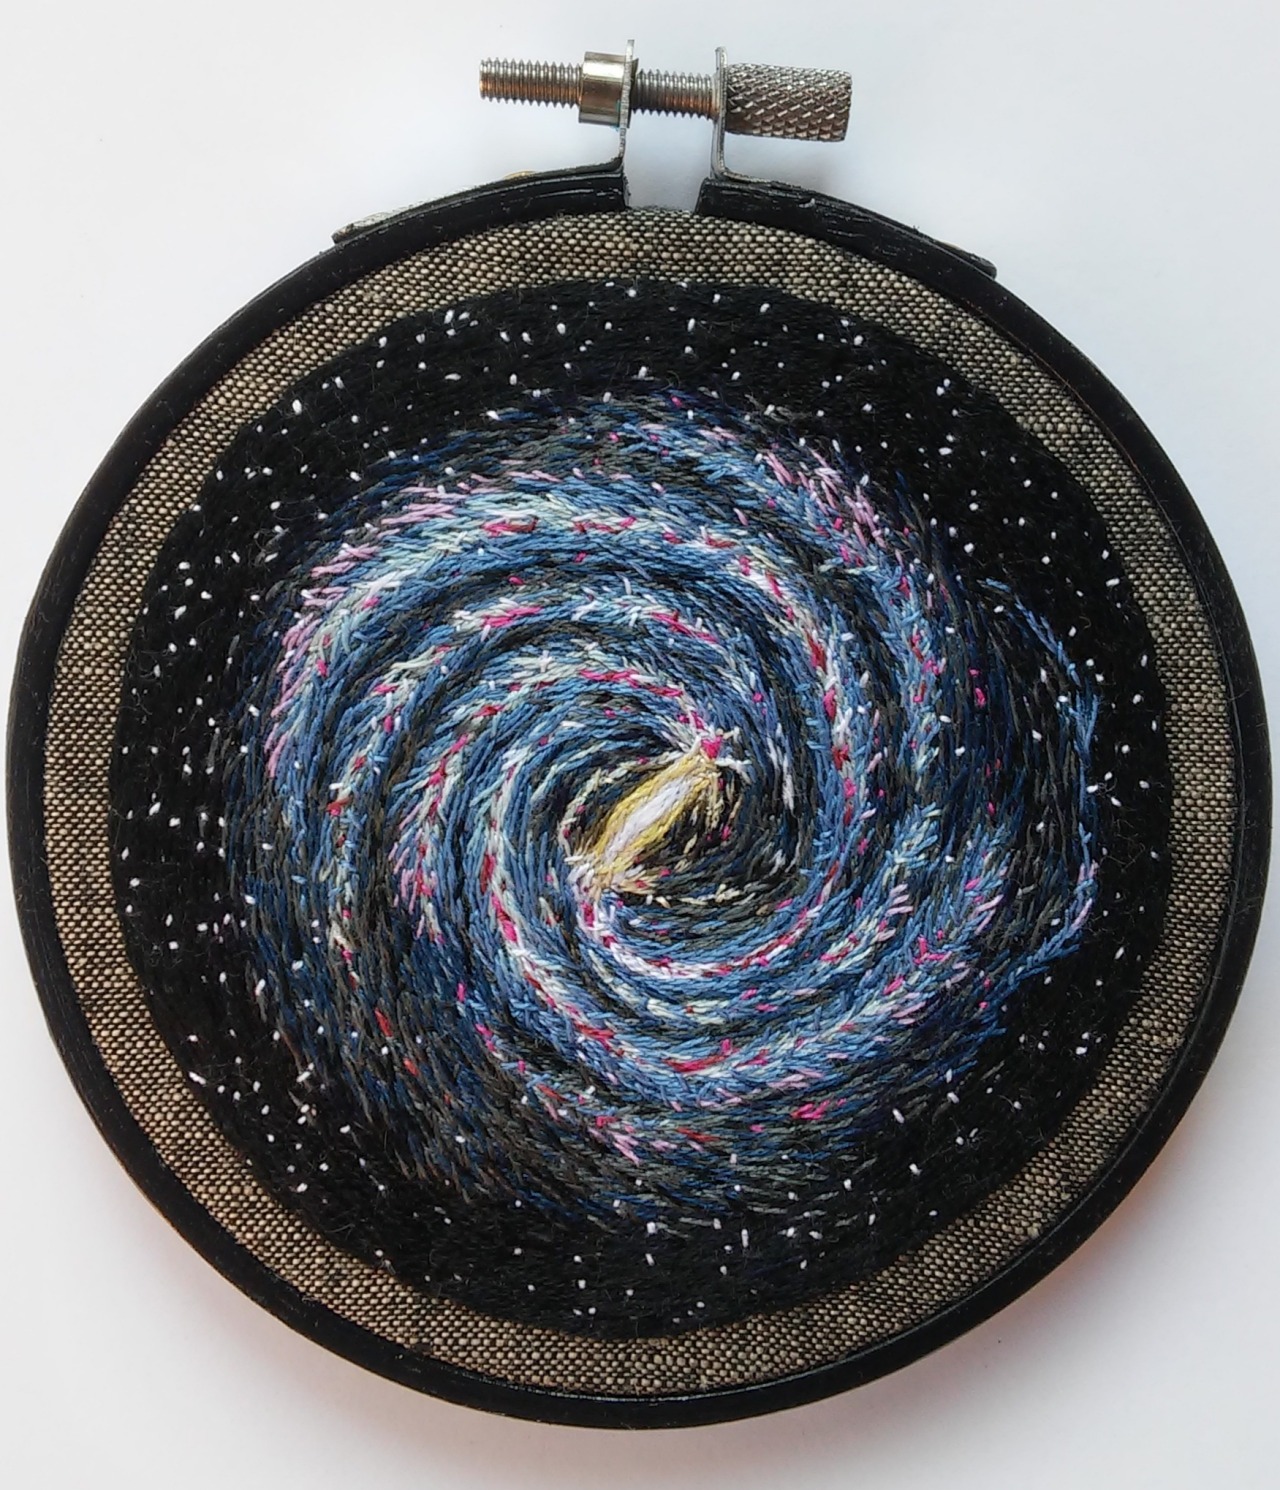 This image shows an illustration of the Milky Way Galaxy. The round frame is black and circular. As you move inward, a white dotted pattern appears. Continuing to the center, a black background appears with white dots showing stars.  Five rings appear in a circular motion colored in threads of blue white and red. The center of the Milky Way Galaxy is white and oval shaped. Credit: Darci Lenker/Darci Lenker Art